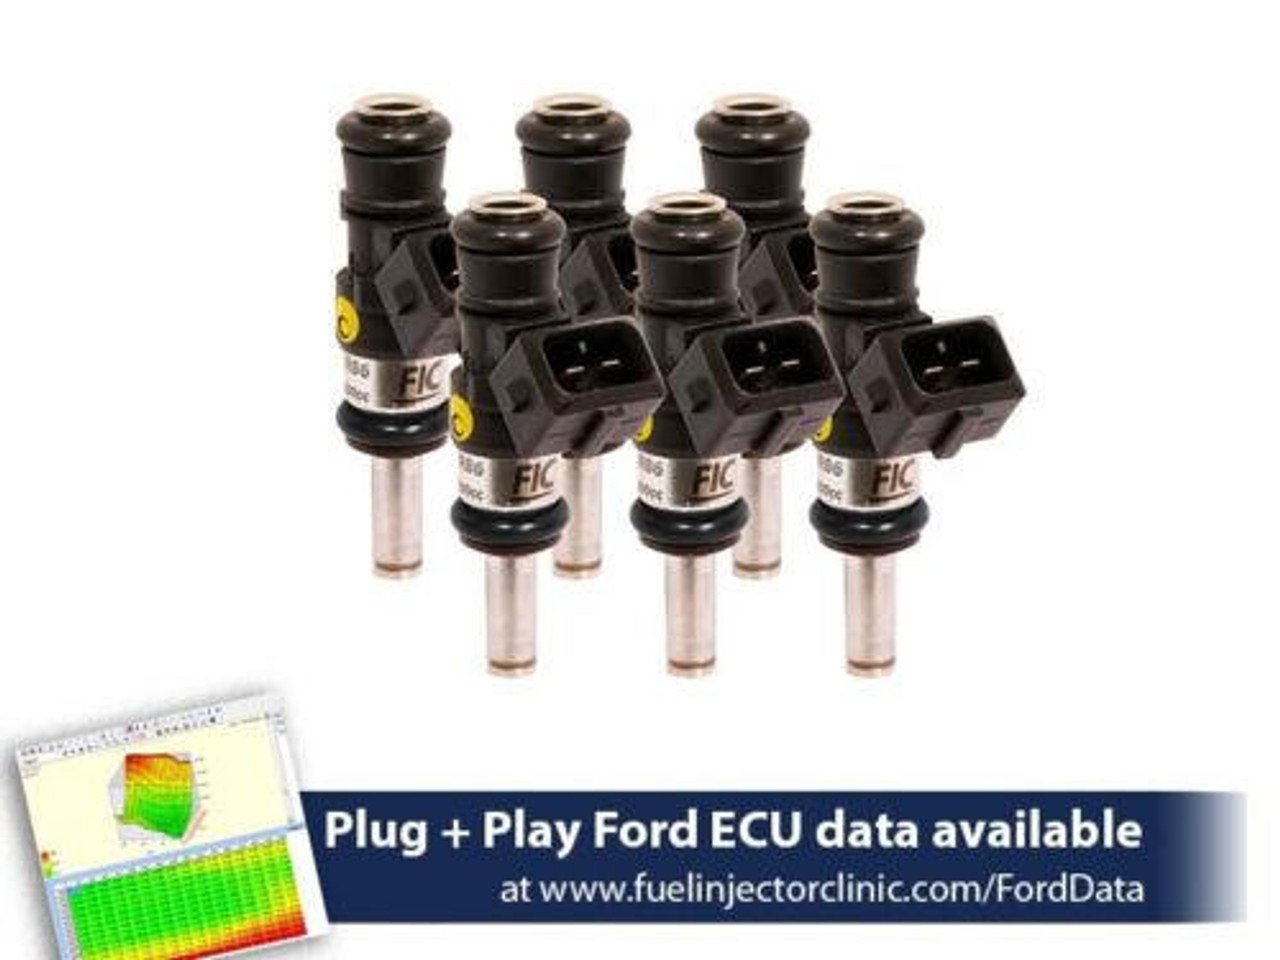  Fuel Injector Clinic 1440CC Injector Set V6 11-17 Mustang 